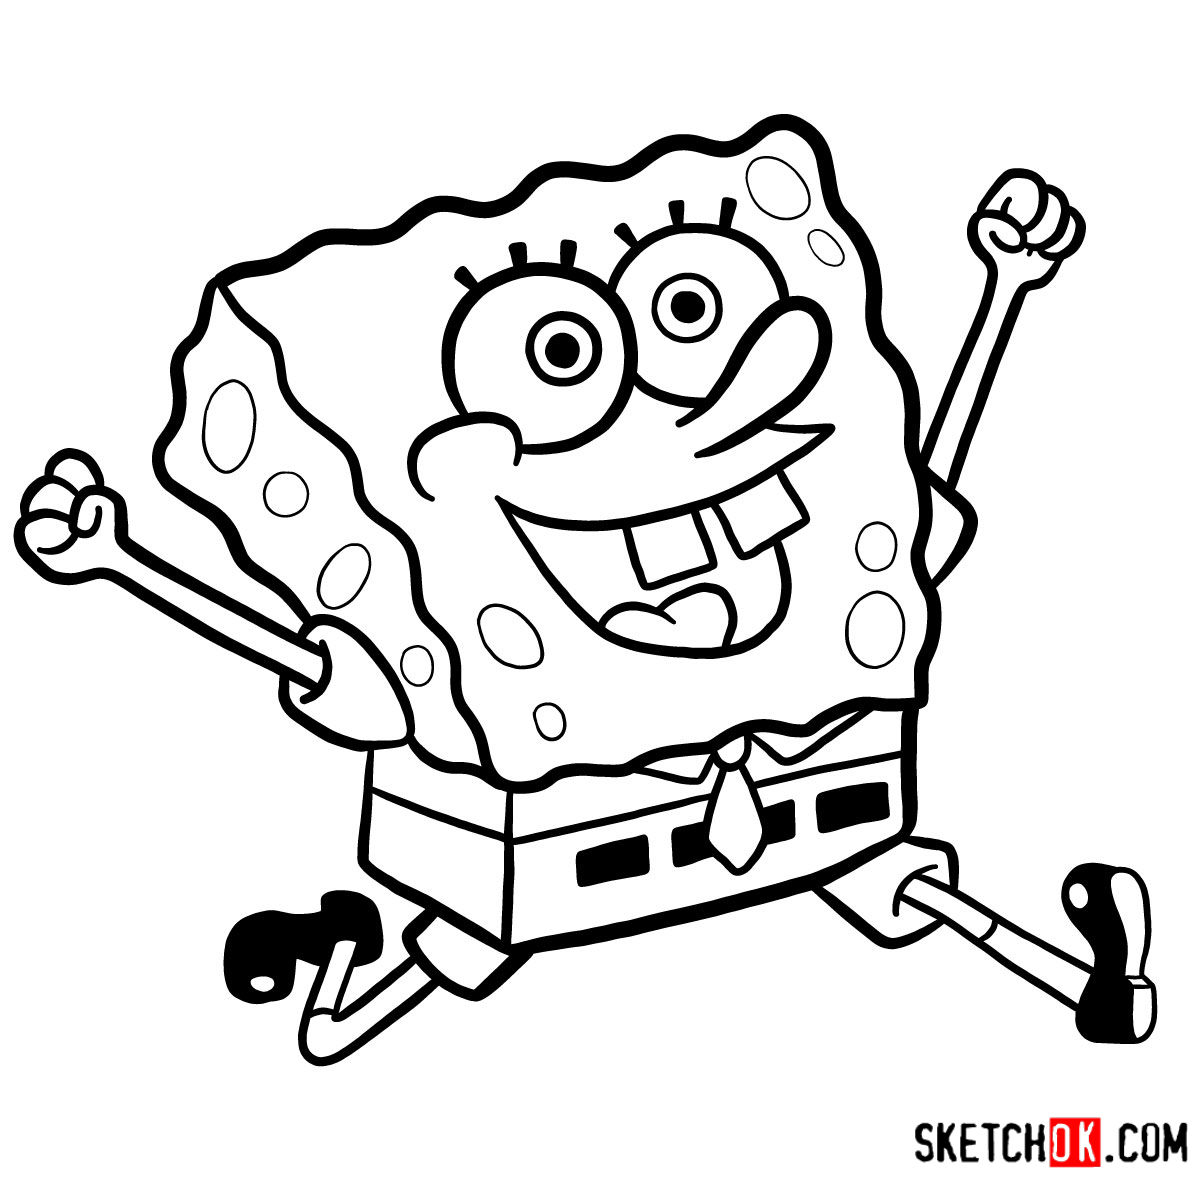 How to draw SpongeBob happy and running - Sketchok easy drawing guides